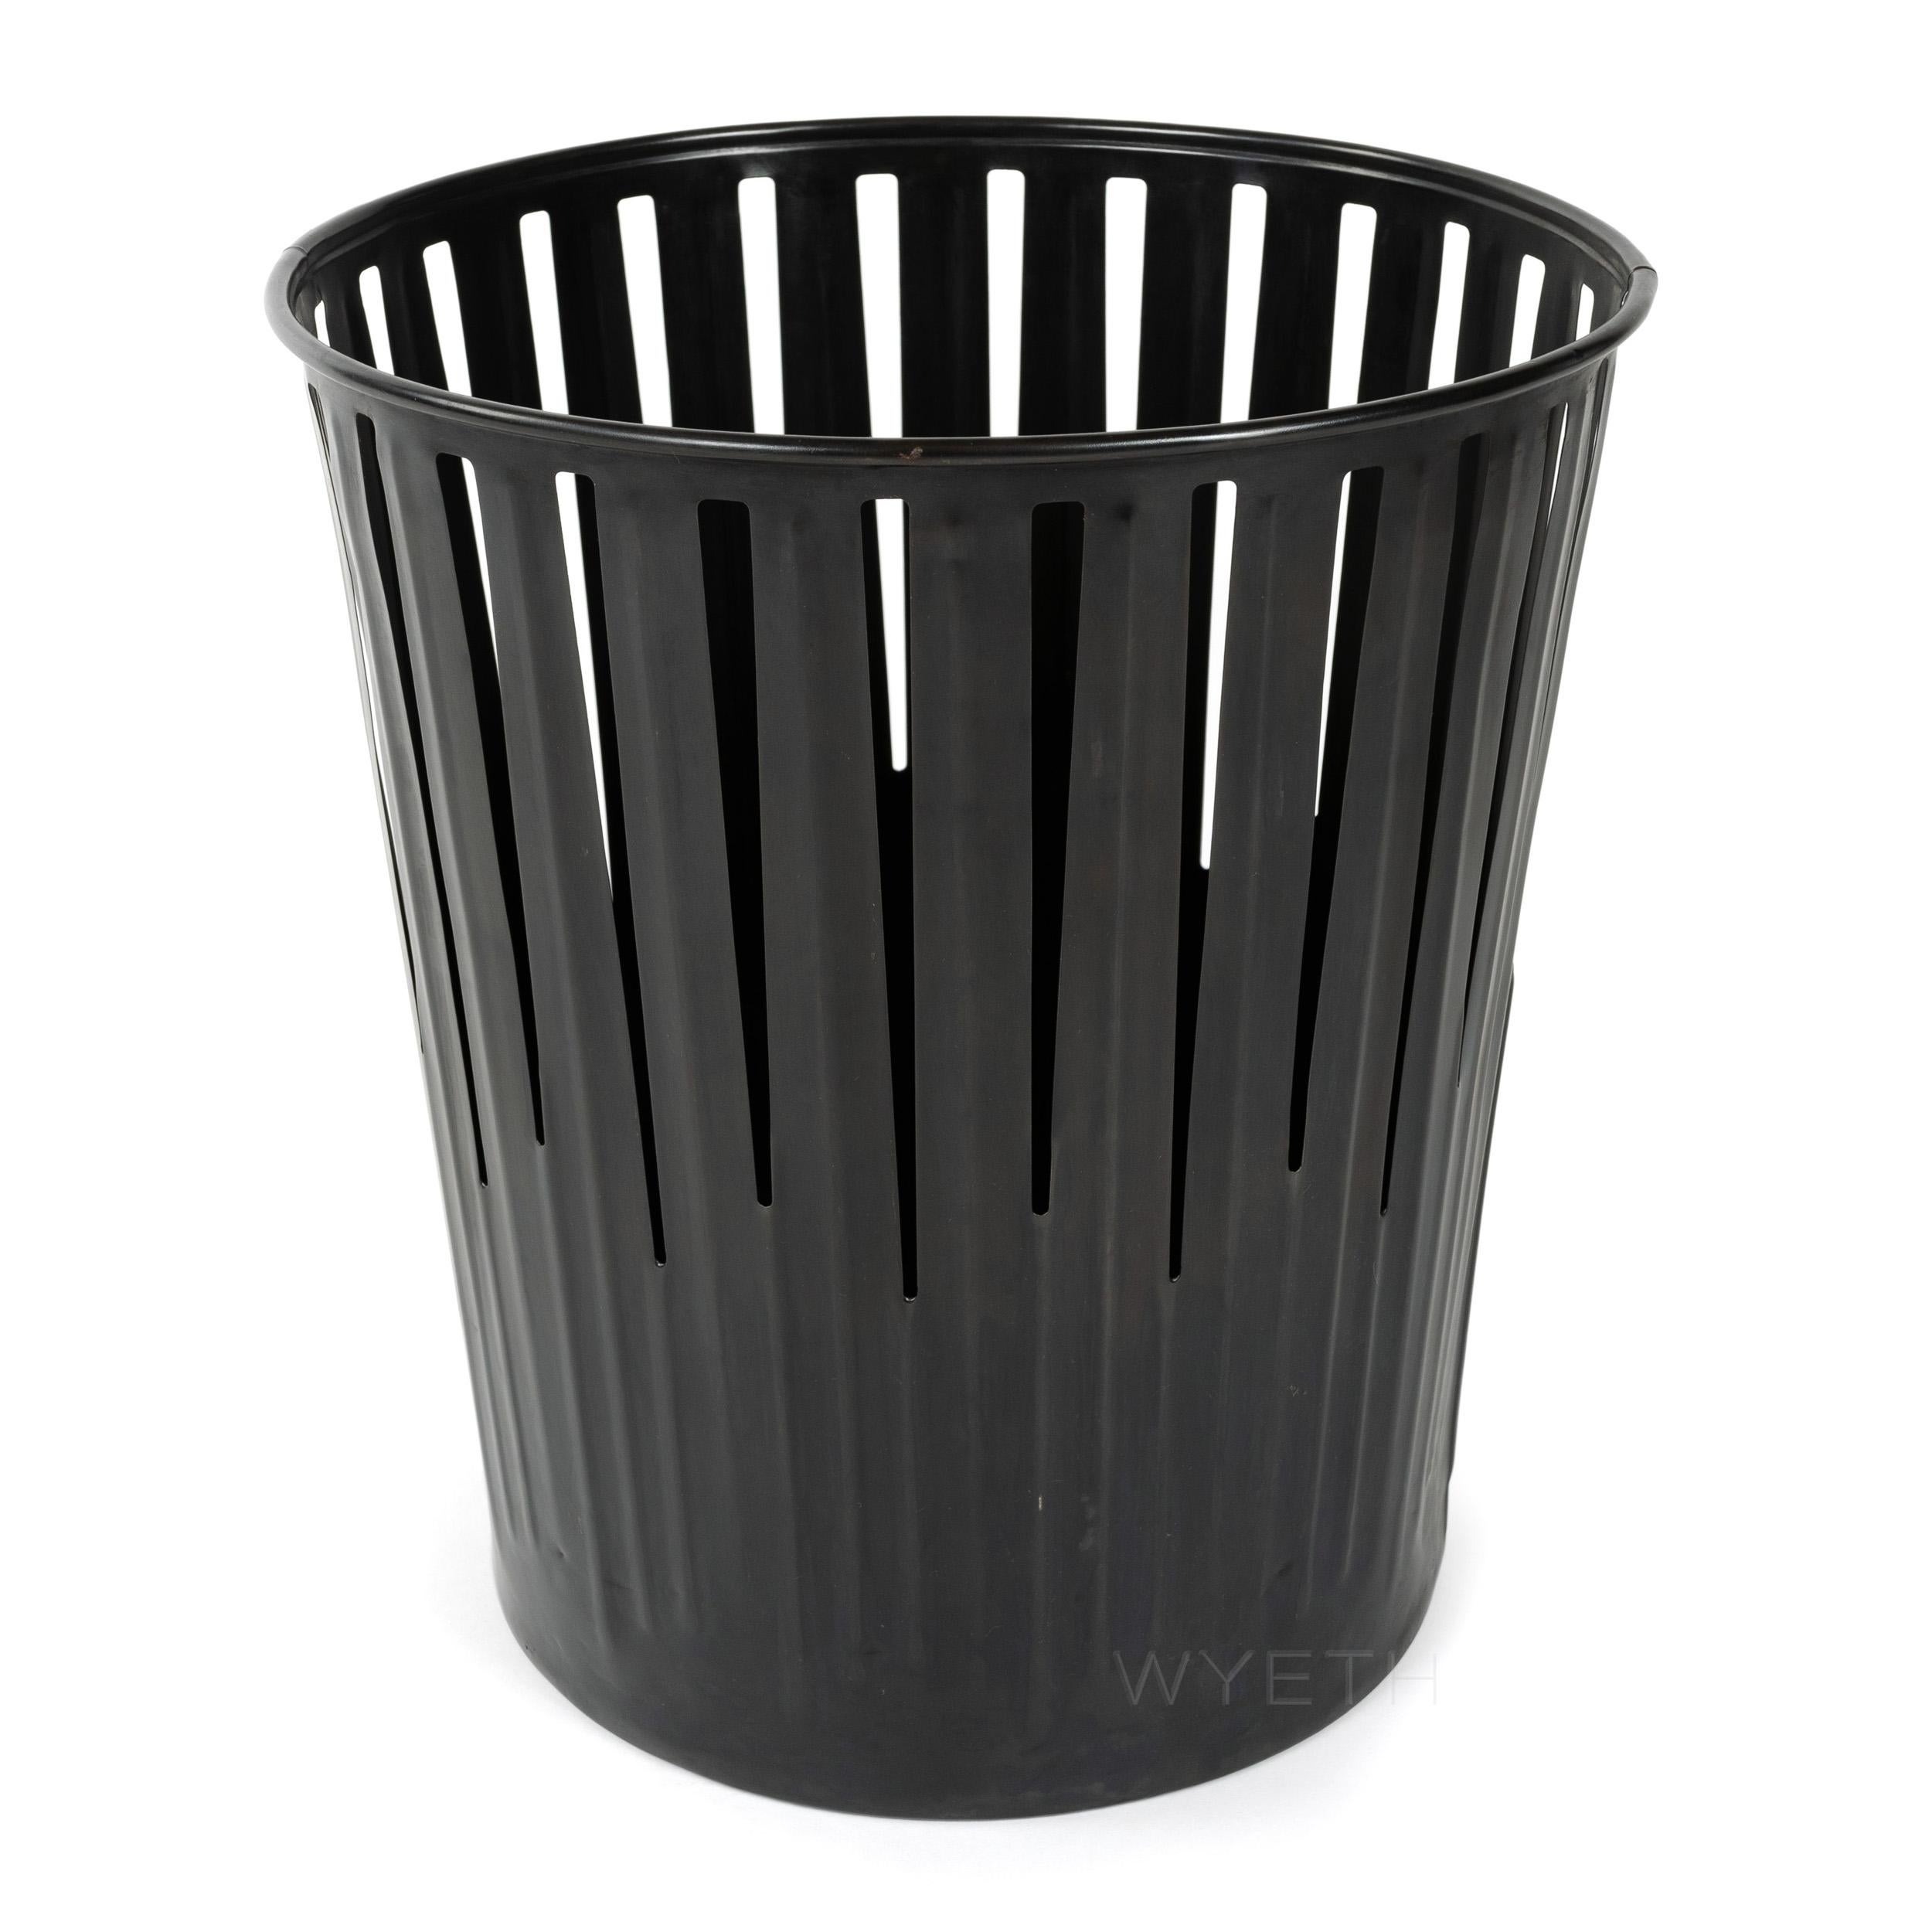 A patinated steel Industrial waste basket having long triangular cutouts and a rolled rim.